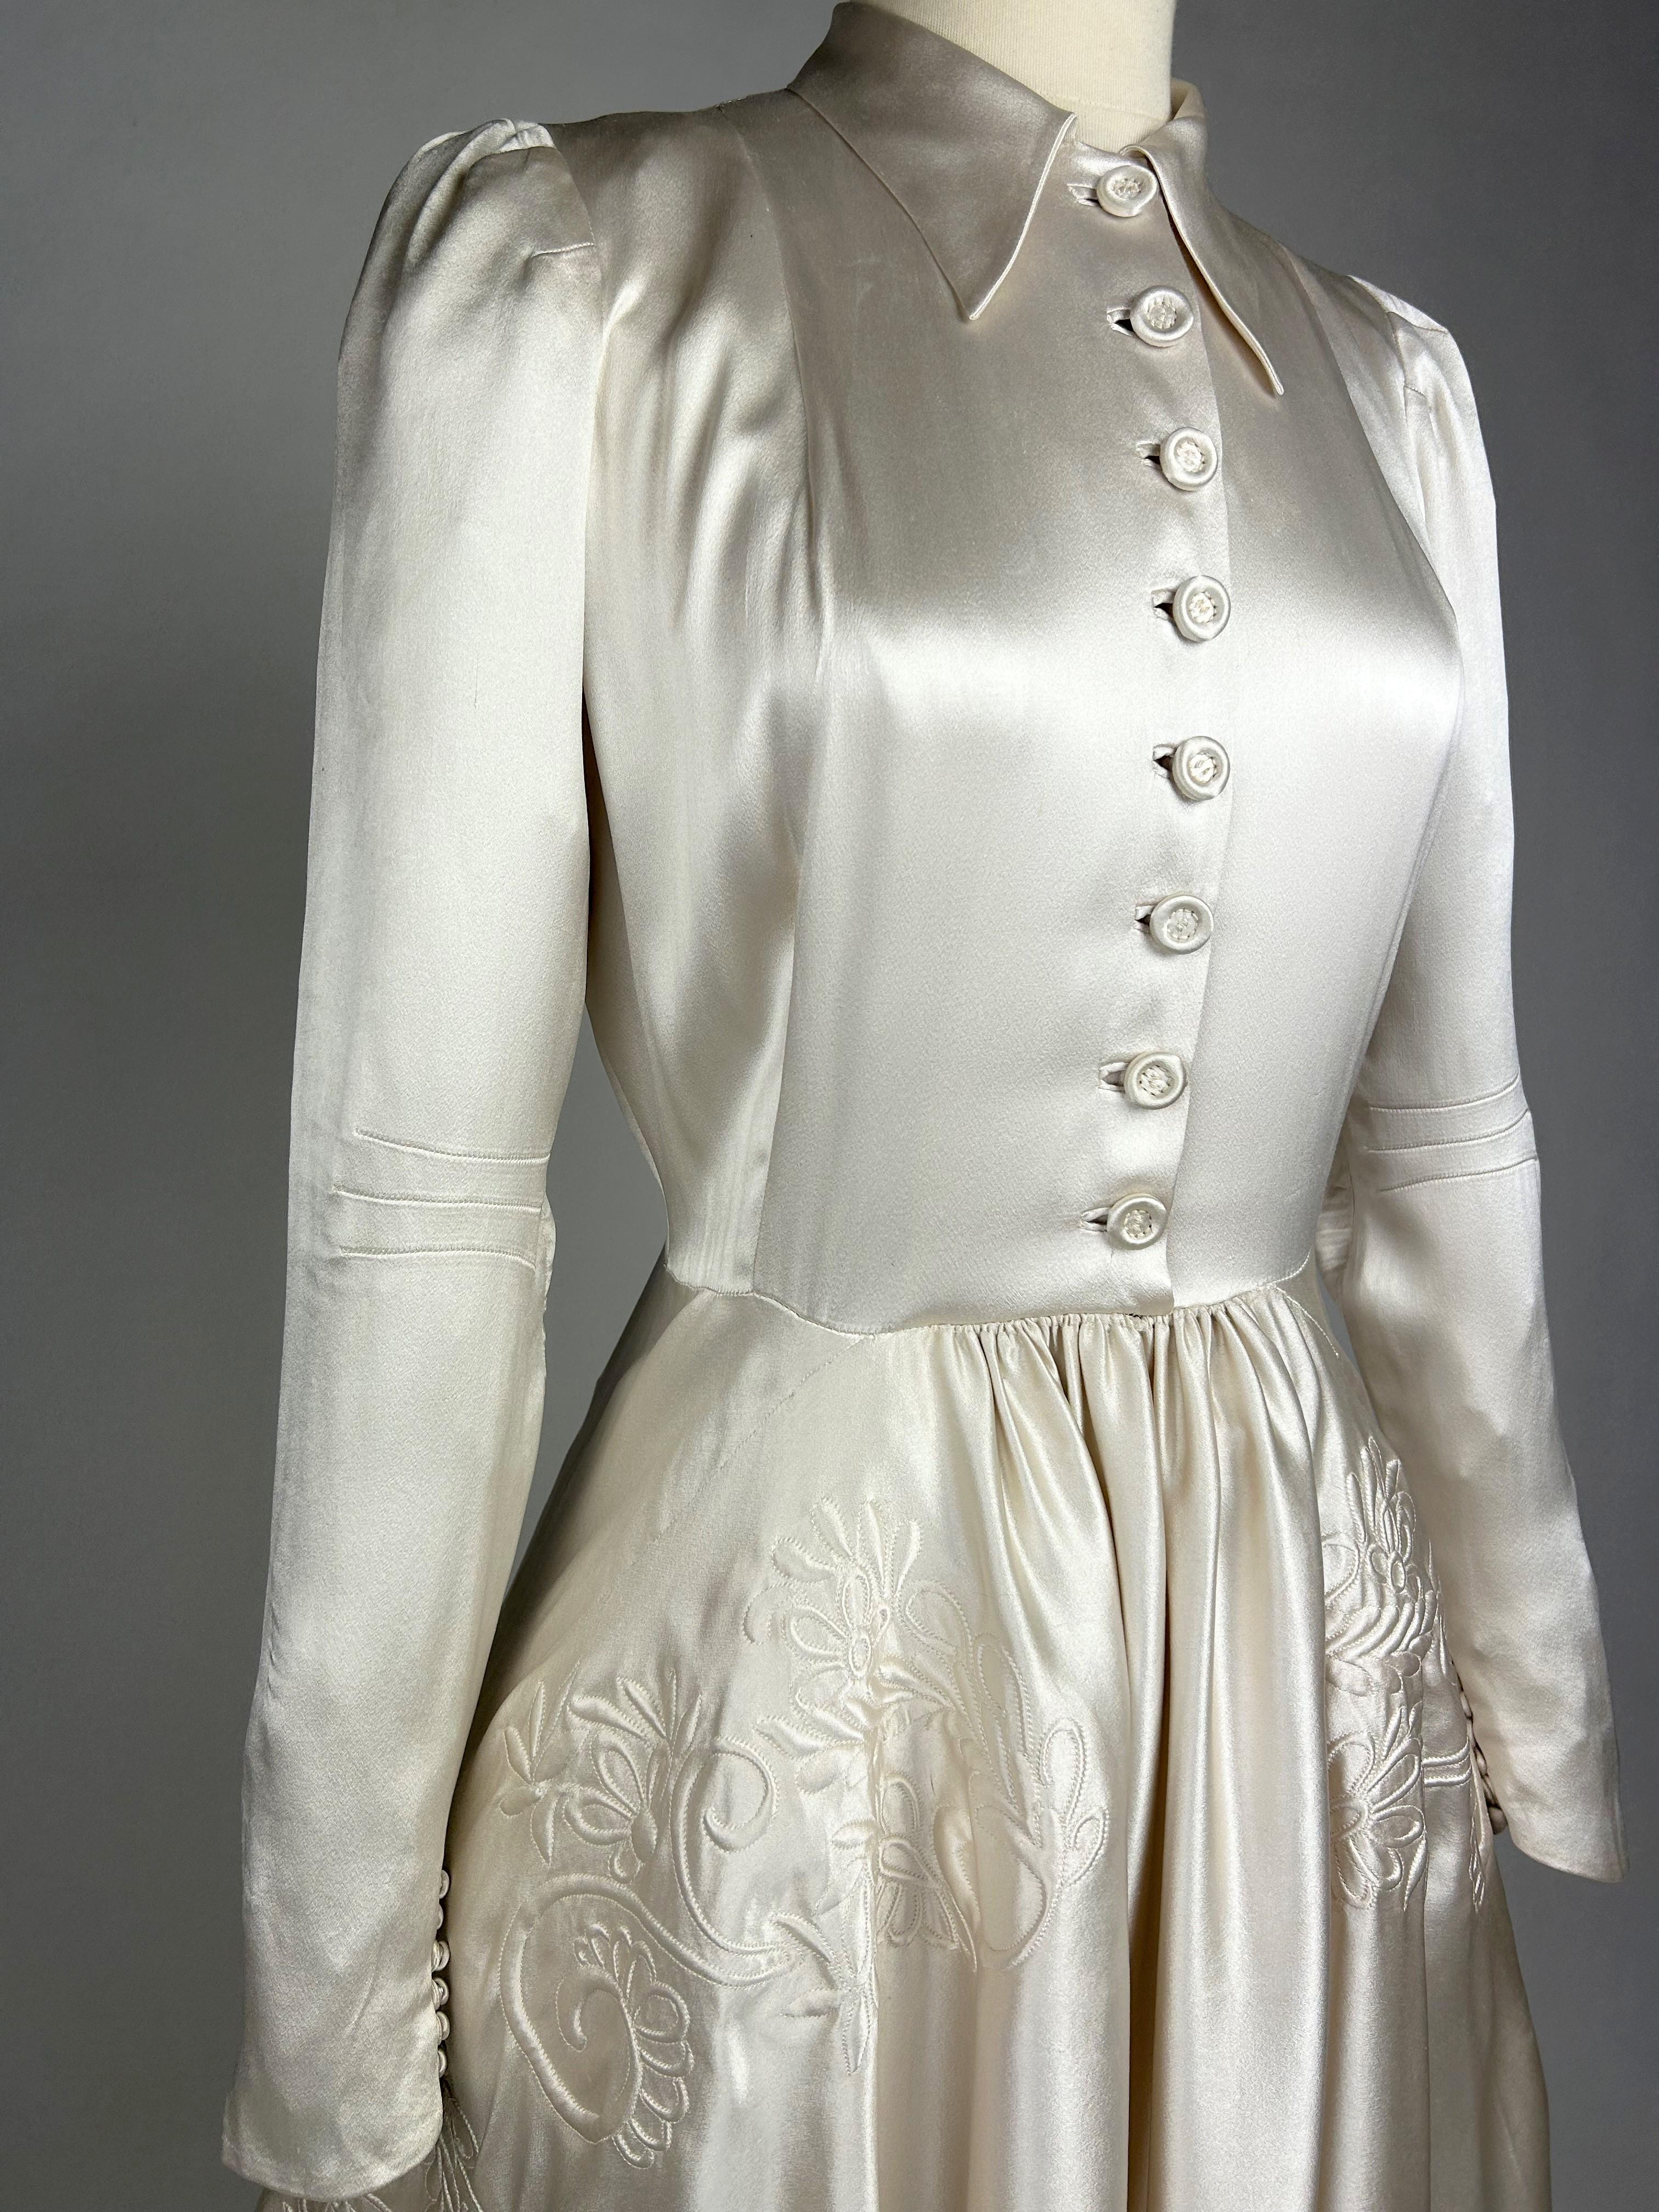 Circa 1938-1942

France

Wedding dress with long train in champagne-coloured Duchesse satin. Fluid cut with a strapless blouse with a folded collar, long sleeves with darts and double buttoning in front and back. The back is extended by a single